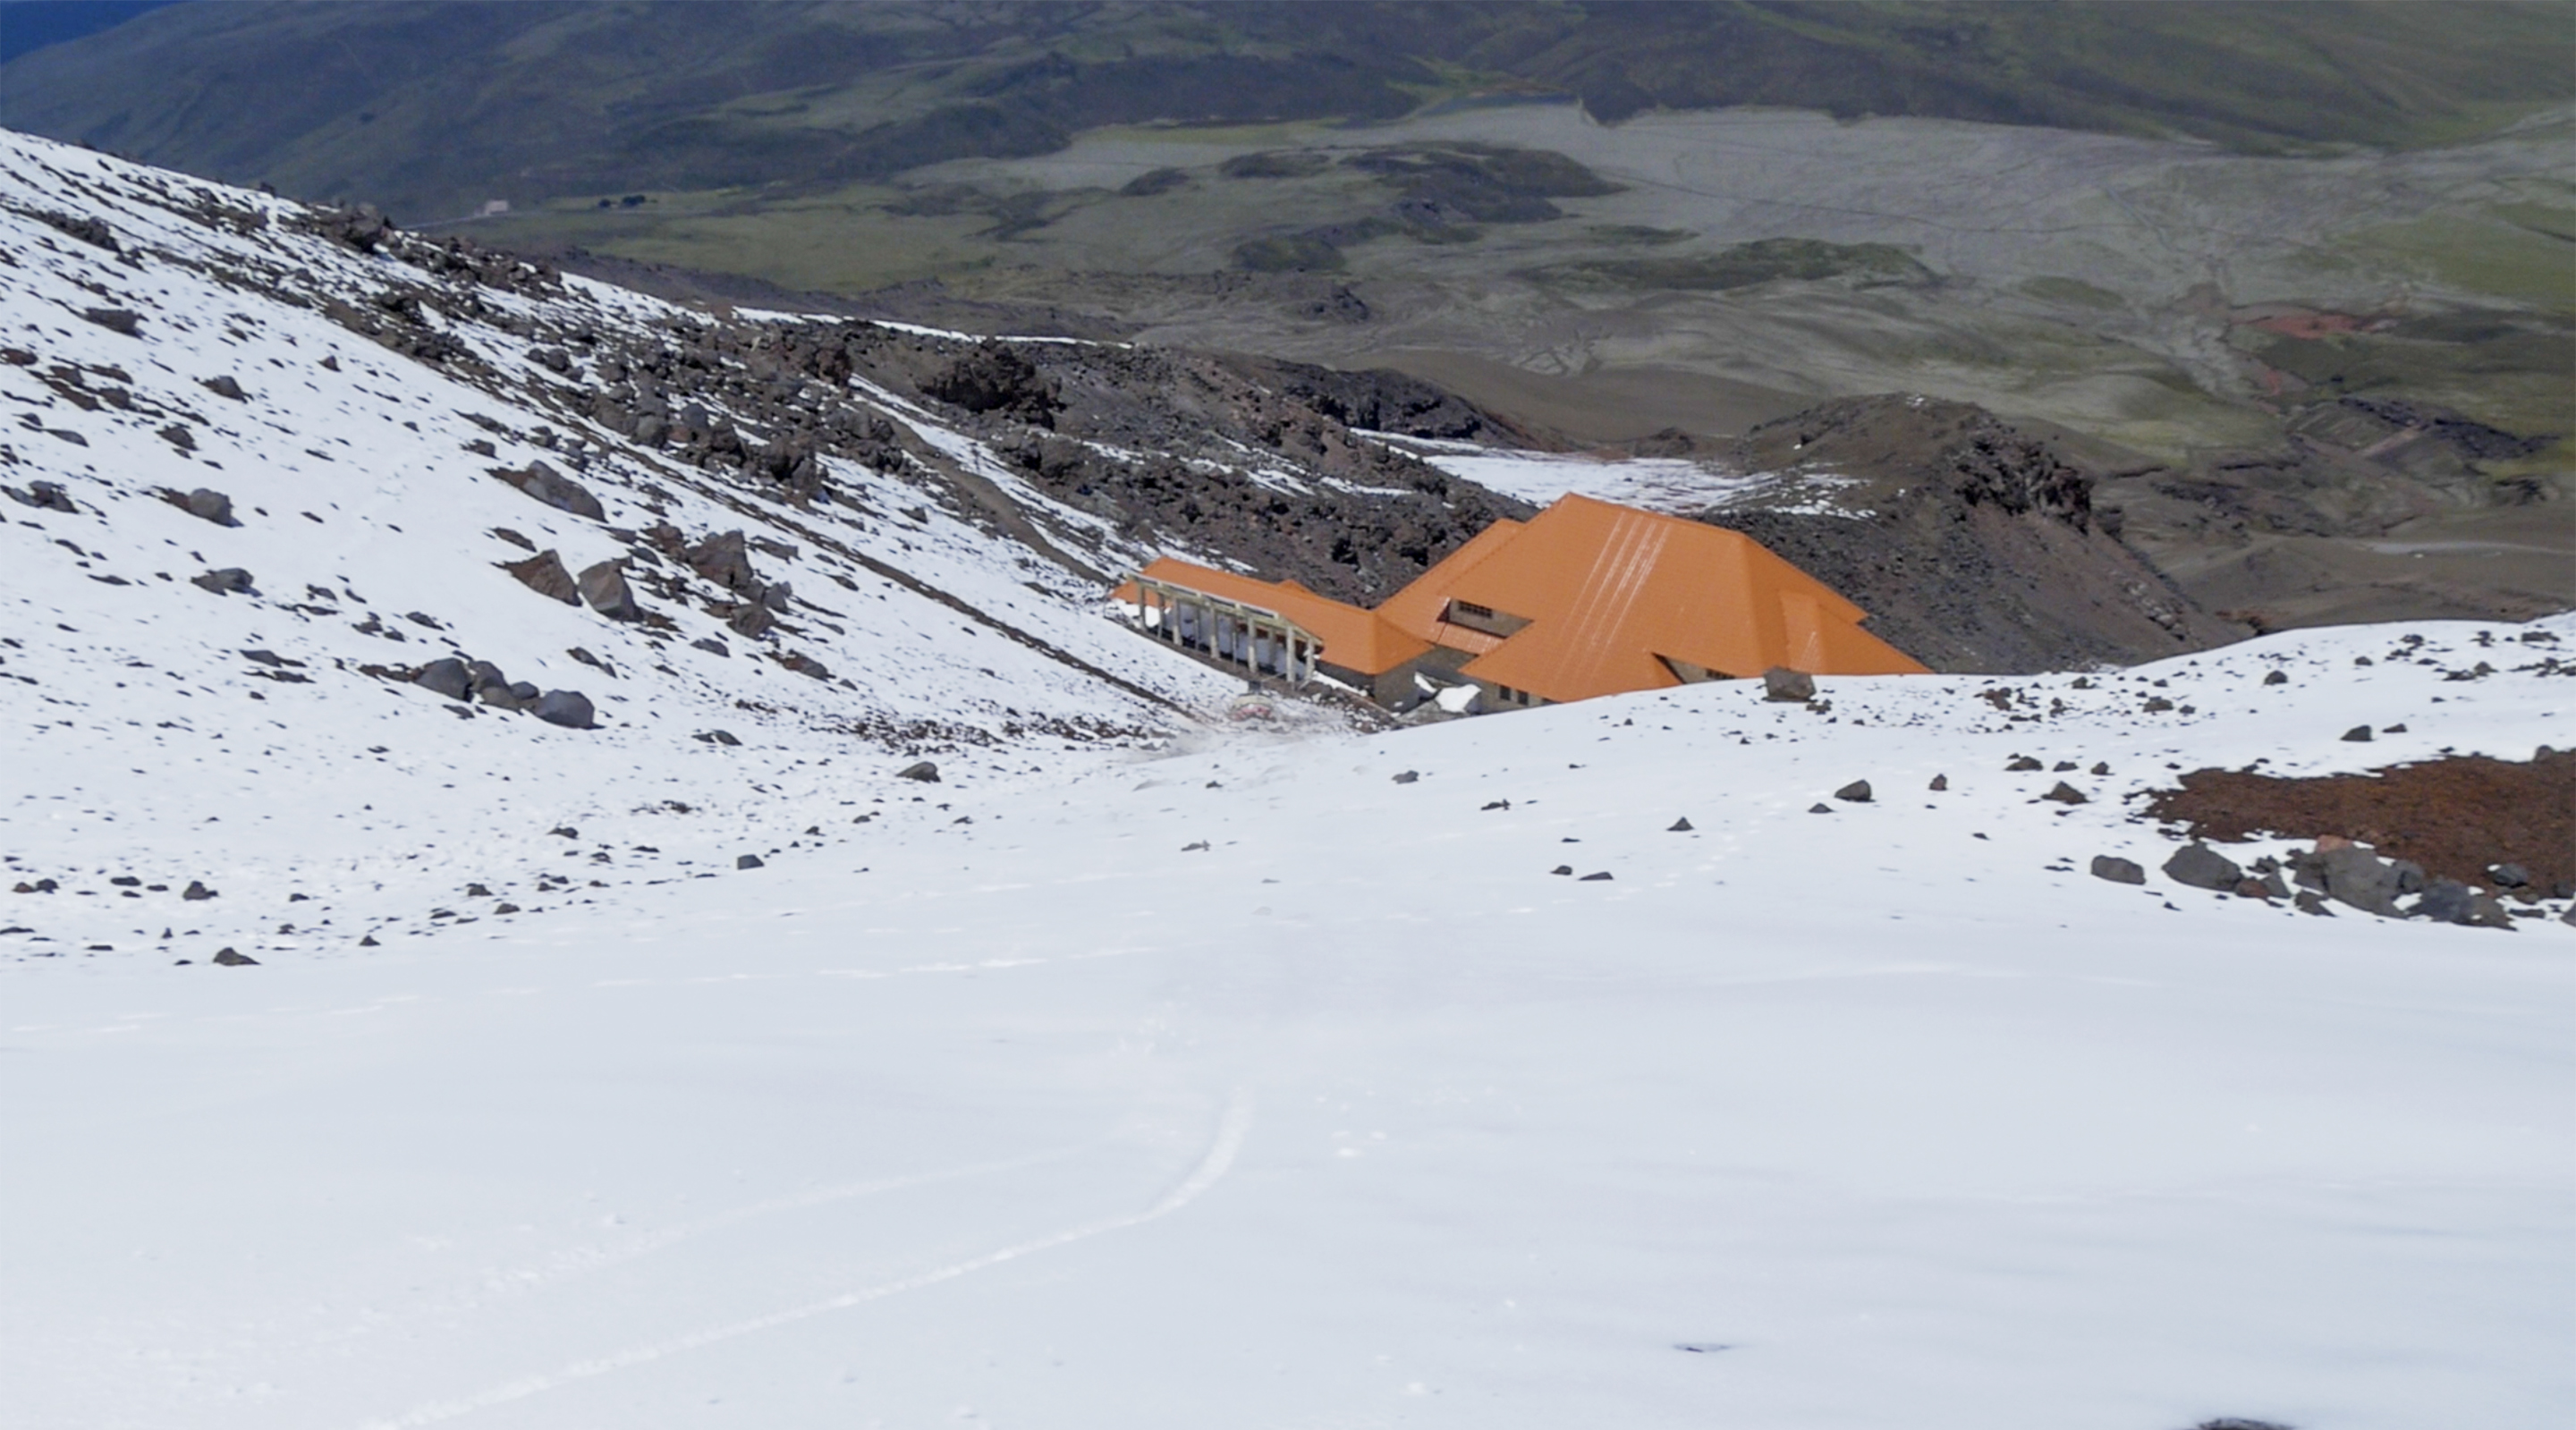 Take a rest at the refugio José Ribas at the base of the snow on Cotopaxi.